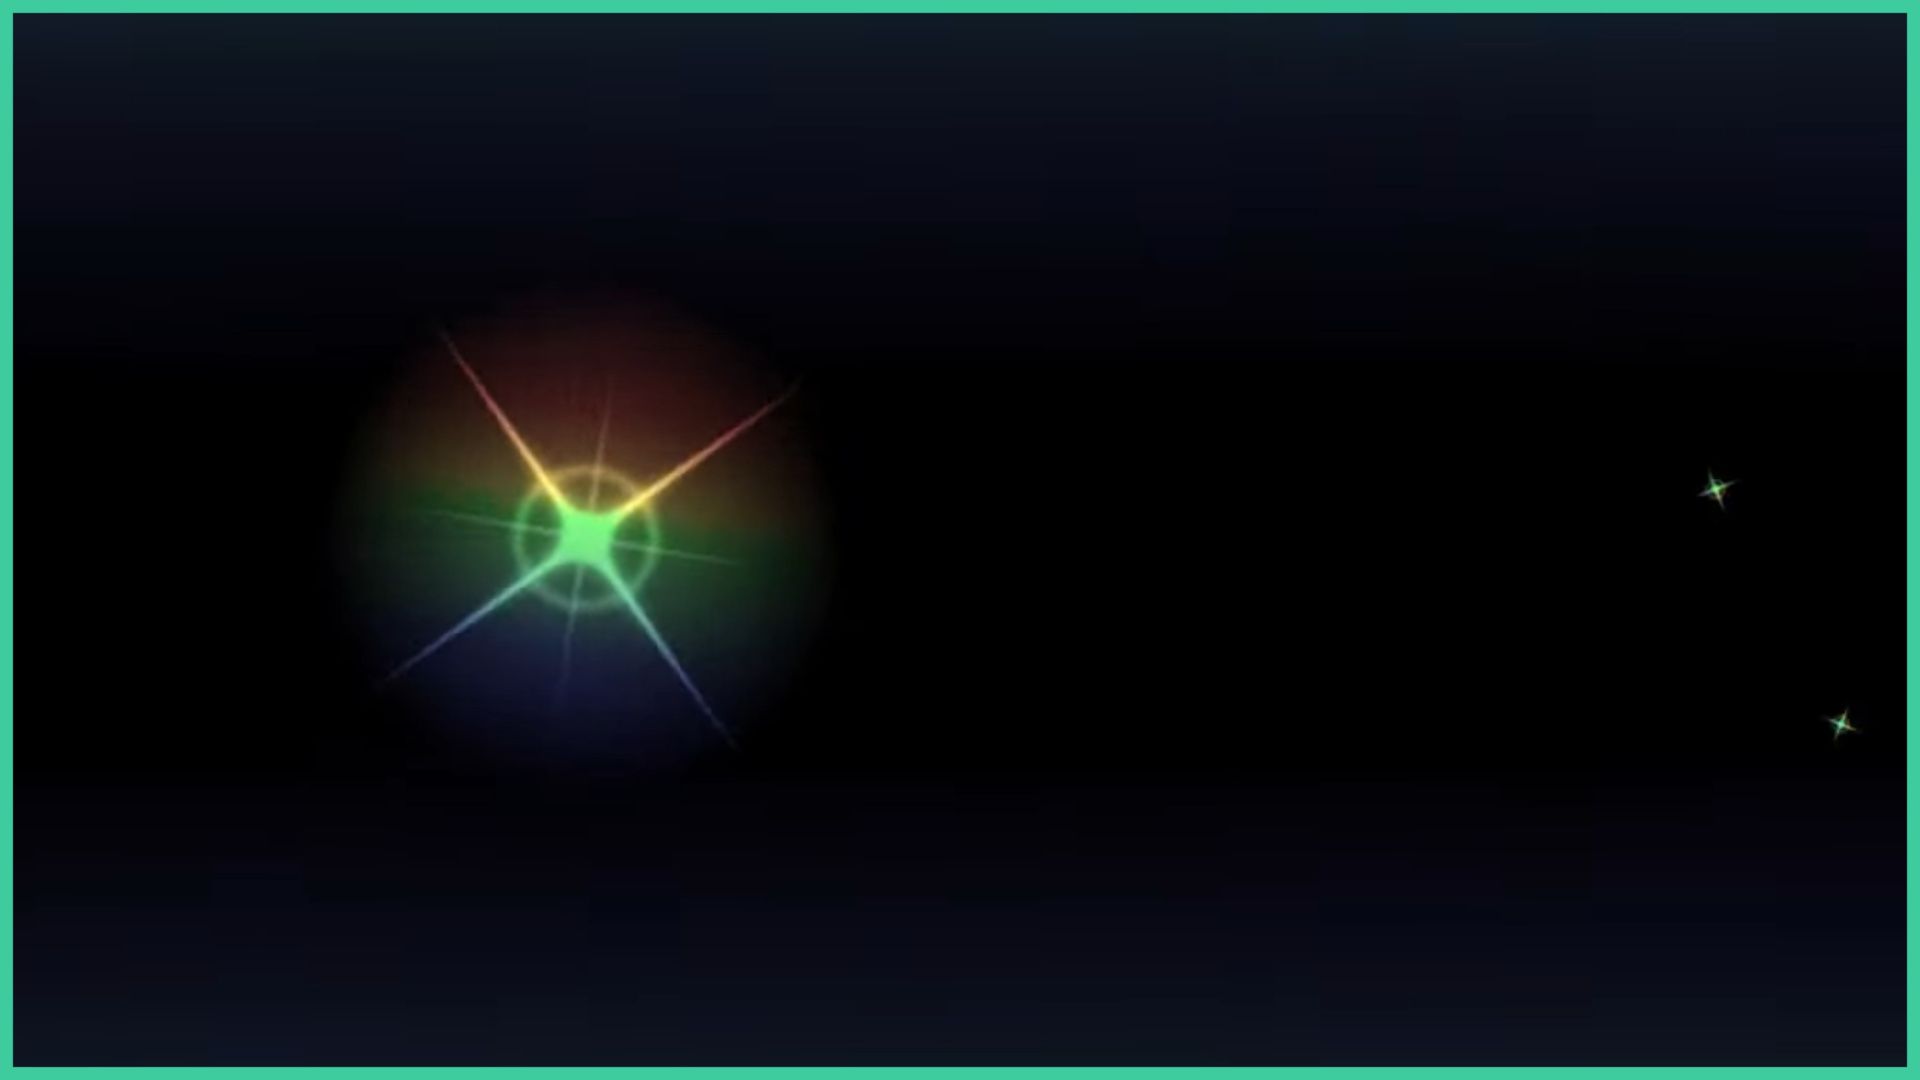 feature image for our hades rng cheatreal guide, the image is a screenshot of the cutscene that plays before you obtain the aura, which is of a rainbow star with a smaller star behind it and a circle, with 2 small stars to the right